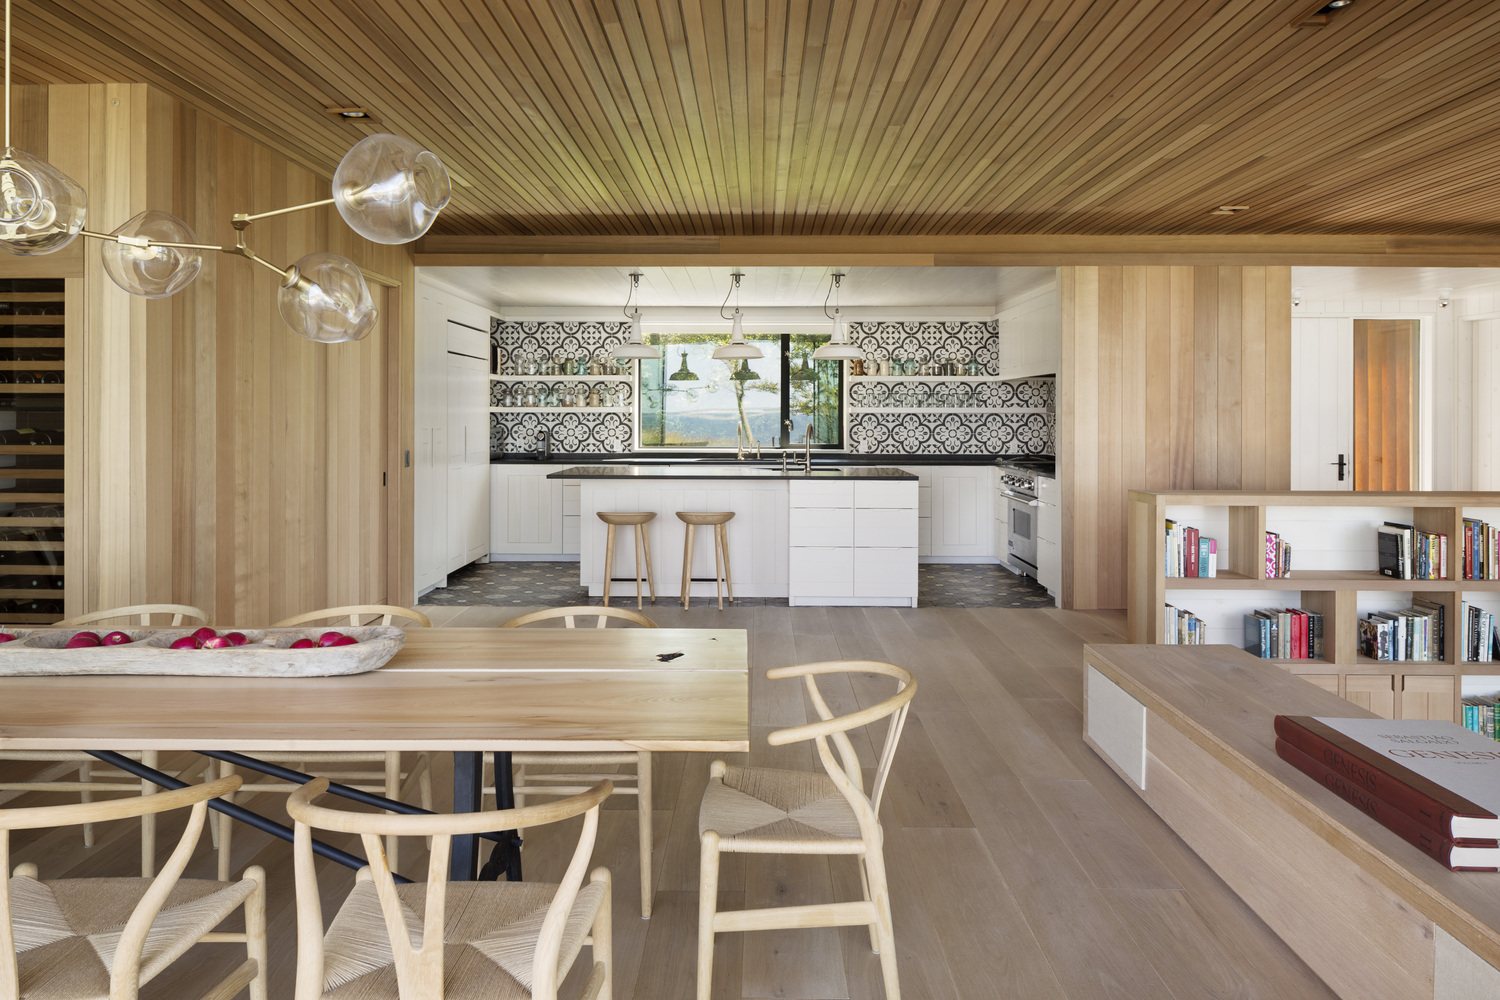 The kitchen and dining areas of the new Peconic House.